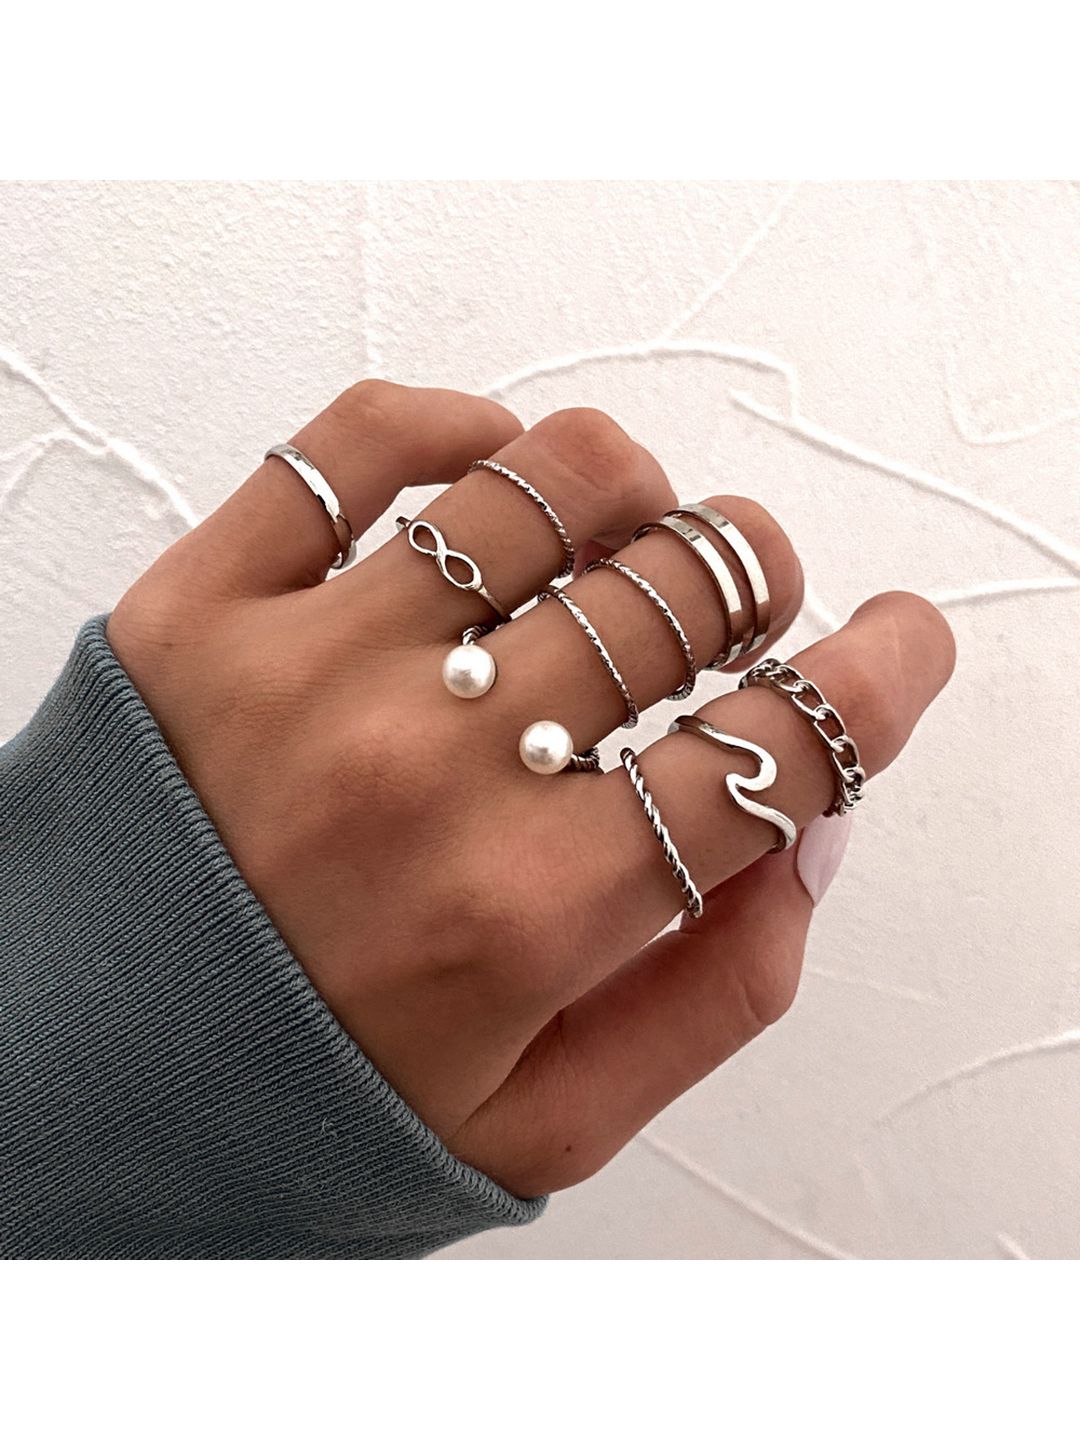 Vembley Set Of 10 Silver-Plated White Pearl-Studded Finger Ring Price in India